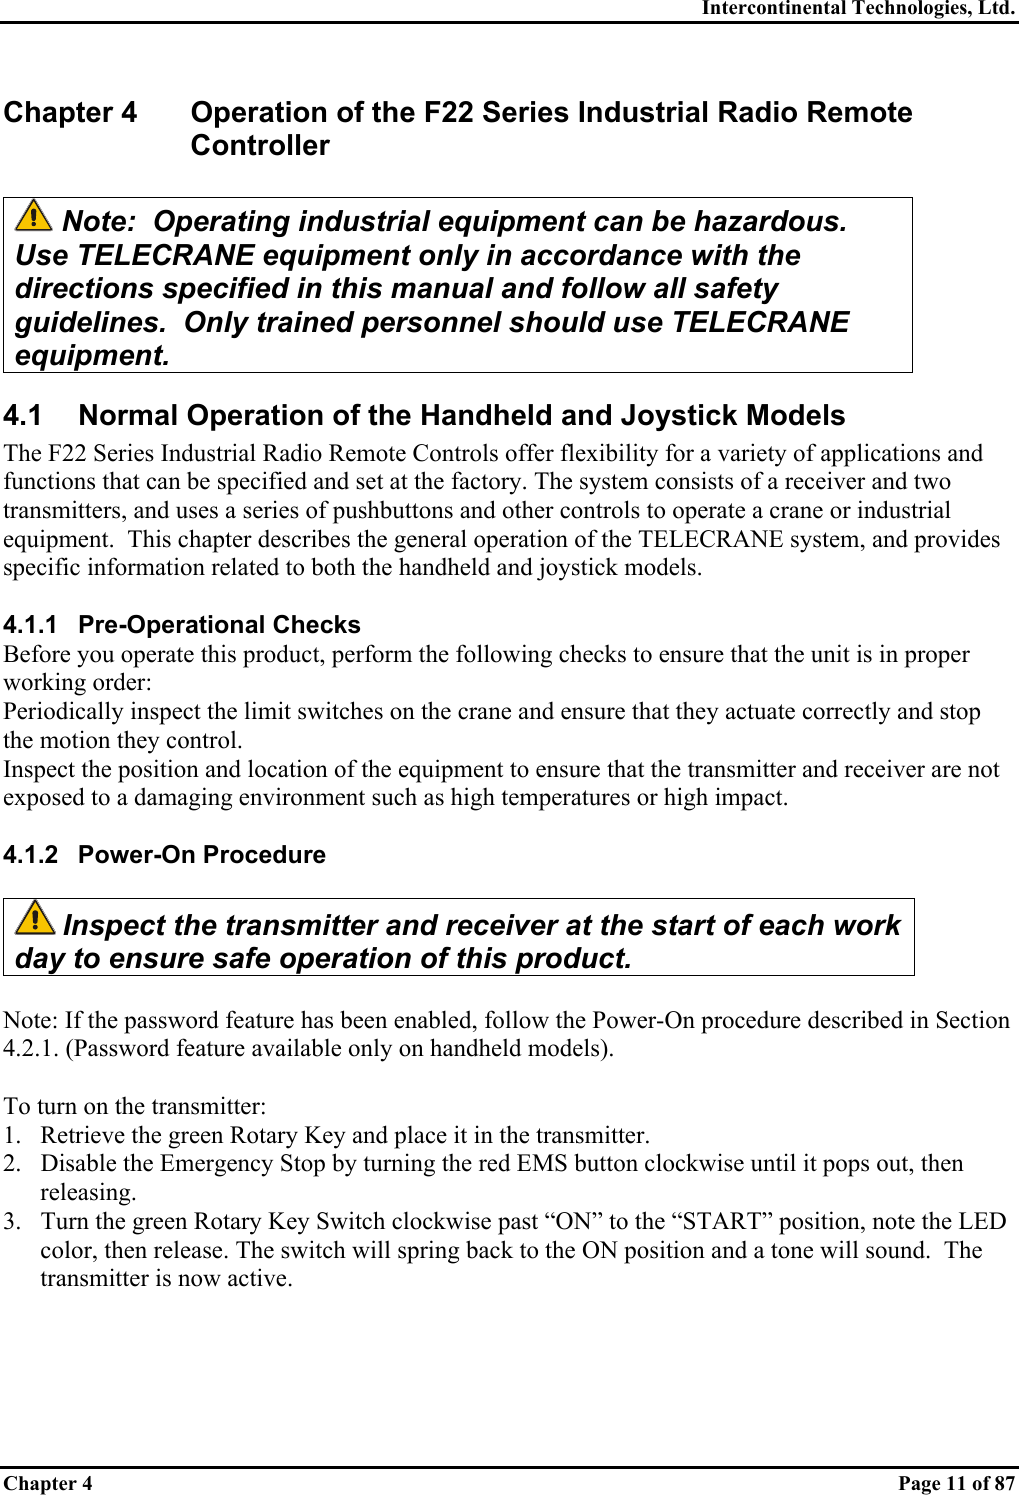 Intercontinental Technologies, Ltd. Chapter 4    Page 11 of 87 Chapter 4  Operation of the F22 Series Industrial Radio Remote Controller   Note:  Operating industrial equipment can be hazardous.  Use TELECRANE equipment only in accordance with the directions specified in this manual and follow all safety guidelines.  Only trained personnel should use TELECRANE equipment. 4.1  Normal Operation of the Handheld and Joystick Models The F22 Series Industrial Radio Remote Controls offer flexibility for a variety of applications and functions that can be specified and set at the factory. The system consists of a receiver and two transmitters, and uses a series of pushbuttons and other controls to operate a crane or industrial equipment.  This chapter describes the general operation of the TELECRANE system, and provides specific information related to both the handheld and joystick models.  4.1.1 Pre-Operational Checks Before you operate this product, perform the following checks to ensure that the unit is in proper working order: Periodically inspect the limit switches on the crane and ensure that they actuate correctly and stop the motion they control. Inspect the position and location of the equipment to ensure that the transmitter and receiver are not exposed to a damaging environment such as high temperatures or high impact.  4.1.2 Power-On Procedure   Inspect the transmitter and receiver at the start of each work day to ensure safe operation of this product.  Note: If the password feature has been enabled, follow the Power-On procedure described in Section 4.2.1. (Password feature available only on handheld models).  To turn on the transmitter: 1.  Retrieve the green Rotary Key and place it in the transmitter. 2.  Disable the Emergency Stop by turning the red EMS button clockwise until it pops out, then releasing. 3.  Turn the green Rotary Key Switch clockwise past “ON” to the “START” position, note the LED color, then release. The switch will spring back to the ON position and a tone will sound.  The transmitter is now active.  